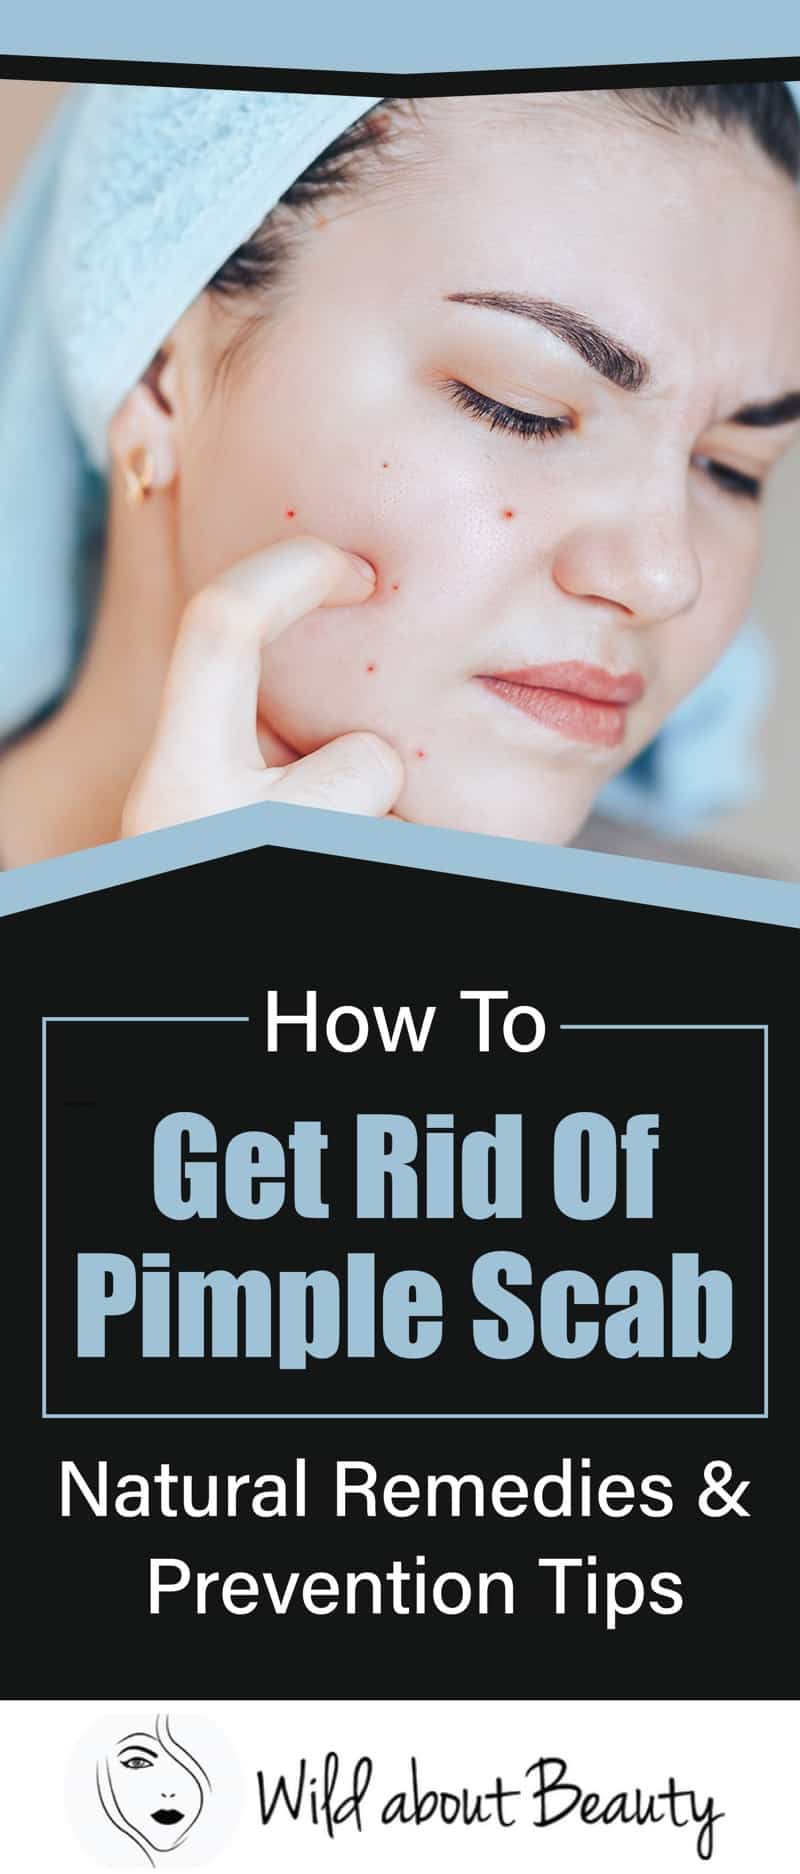 How To Get Rid Of Pimple Scabs